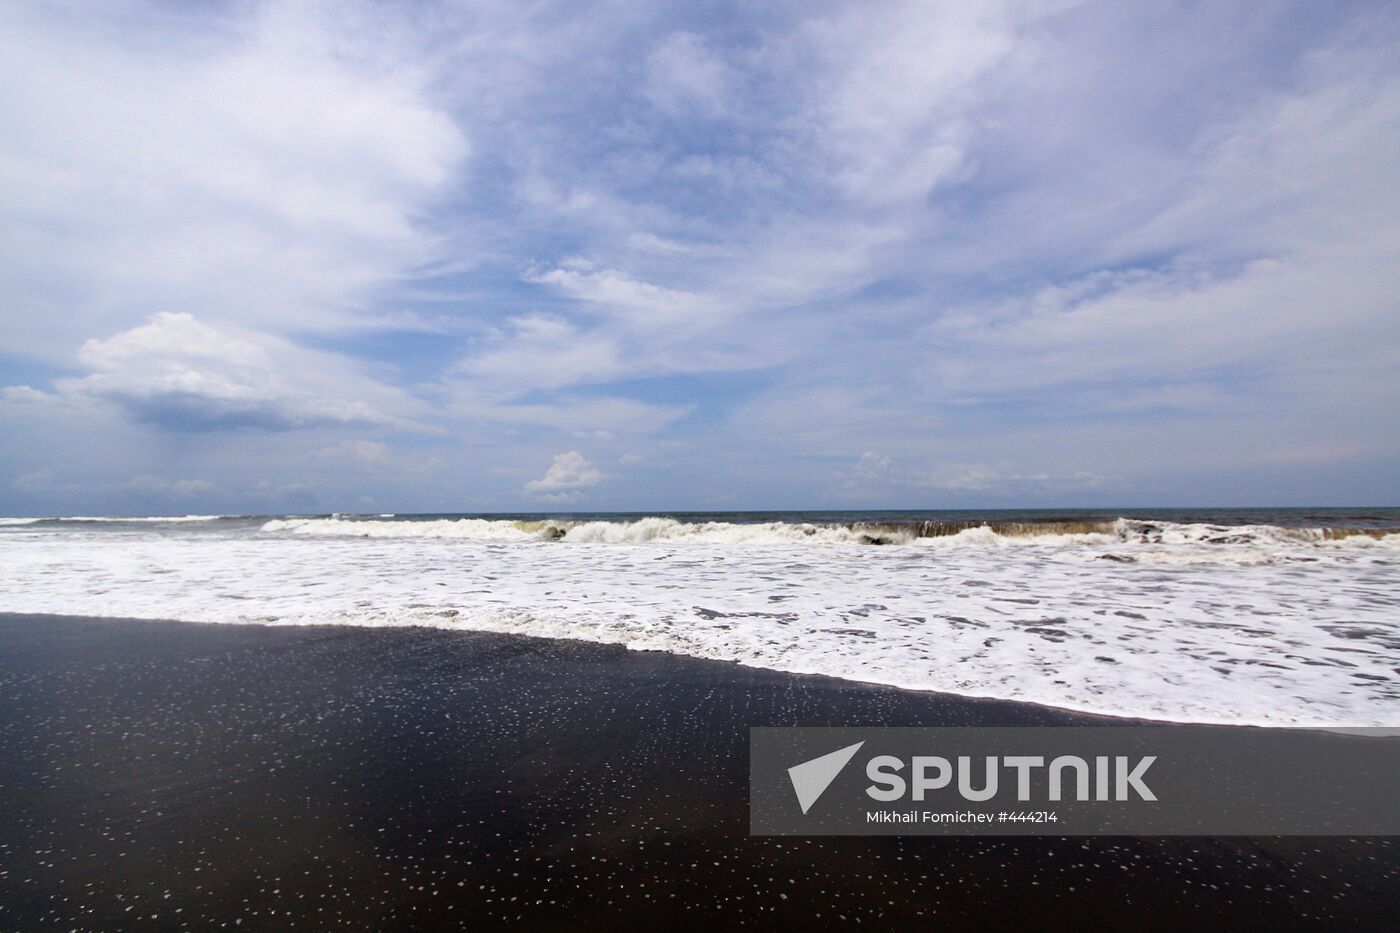 Foreign Countries. Indonesia. Bali beaches